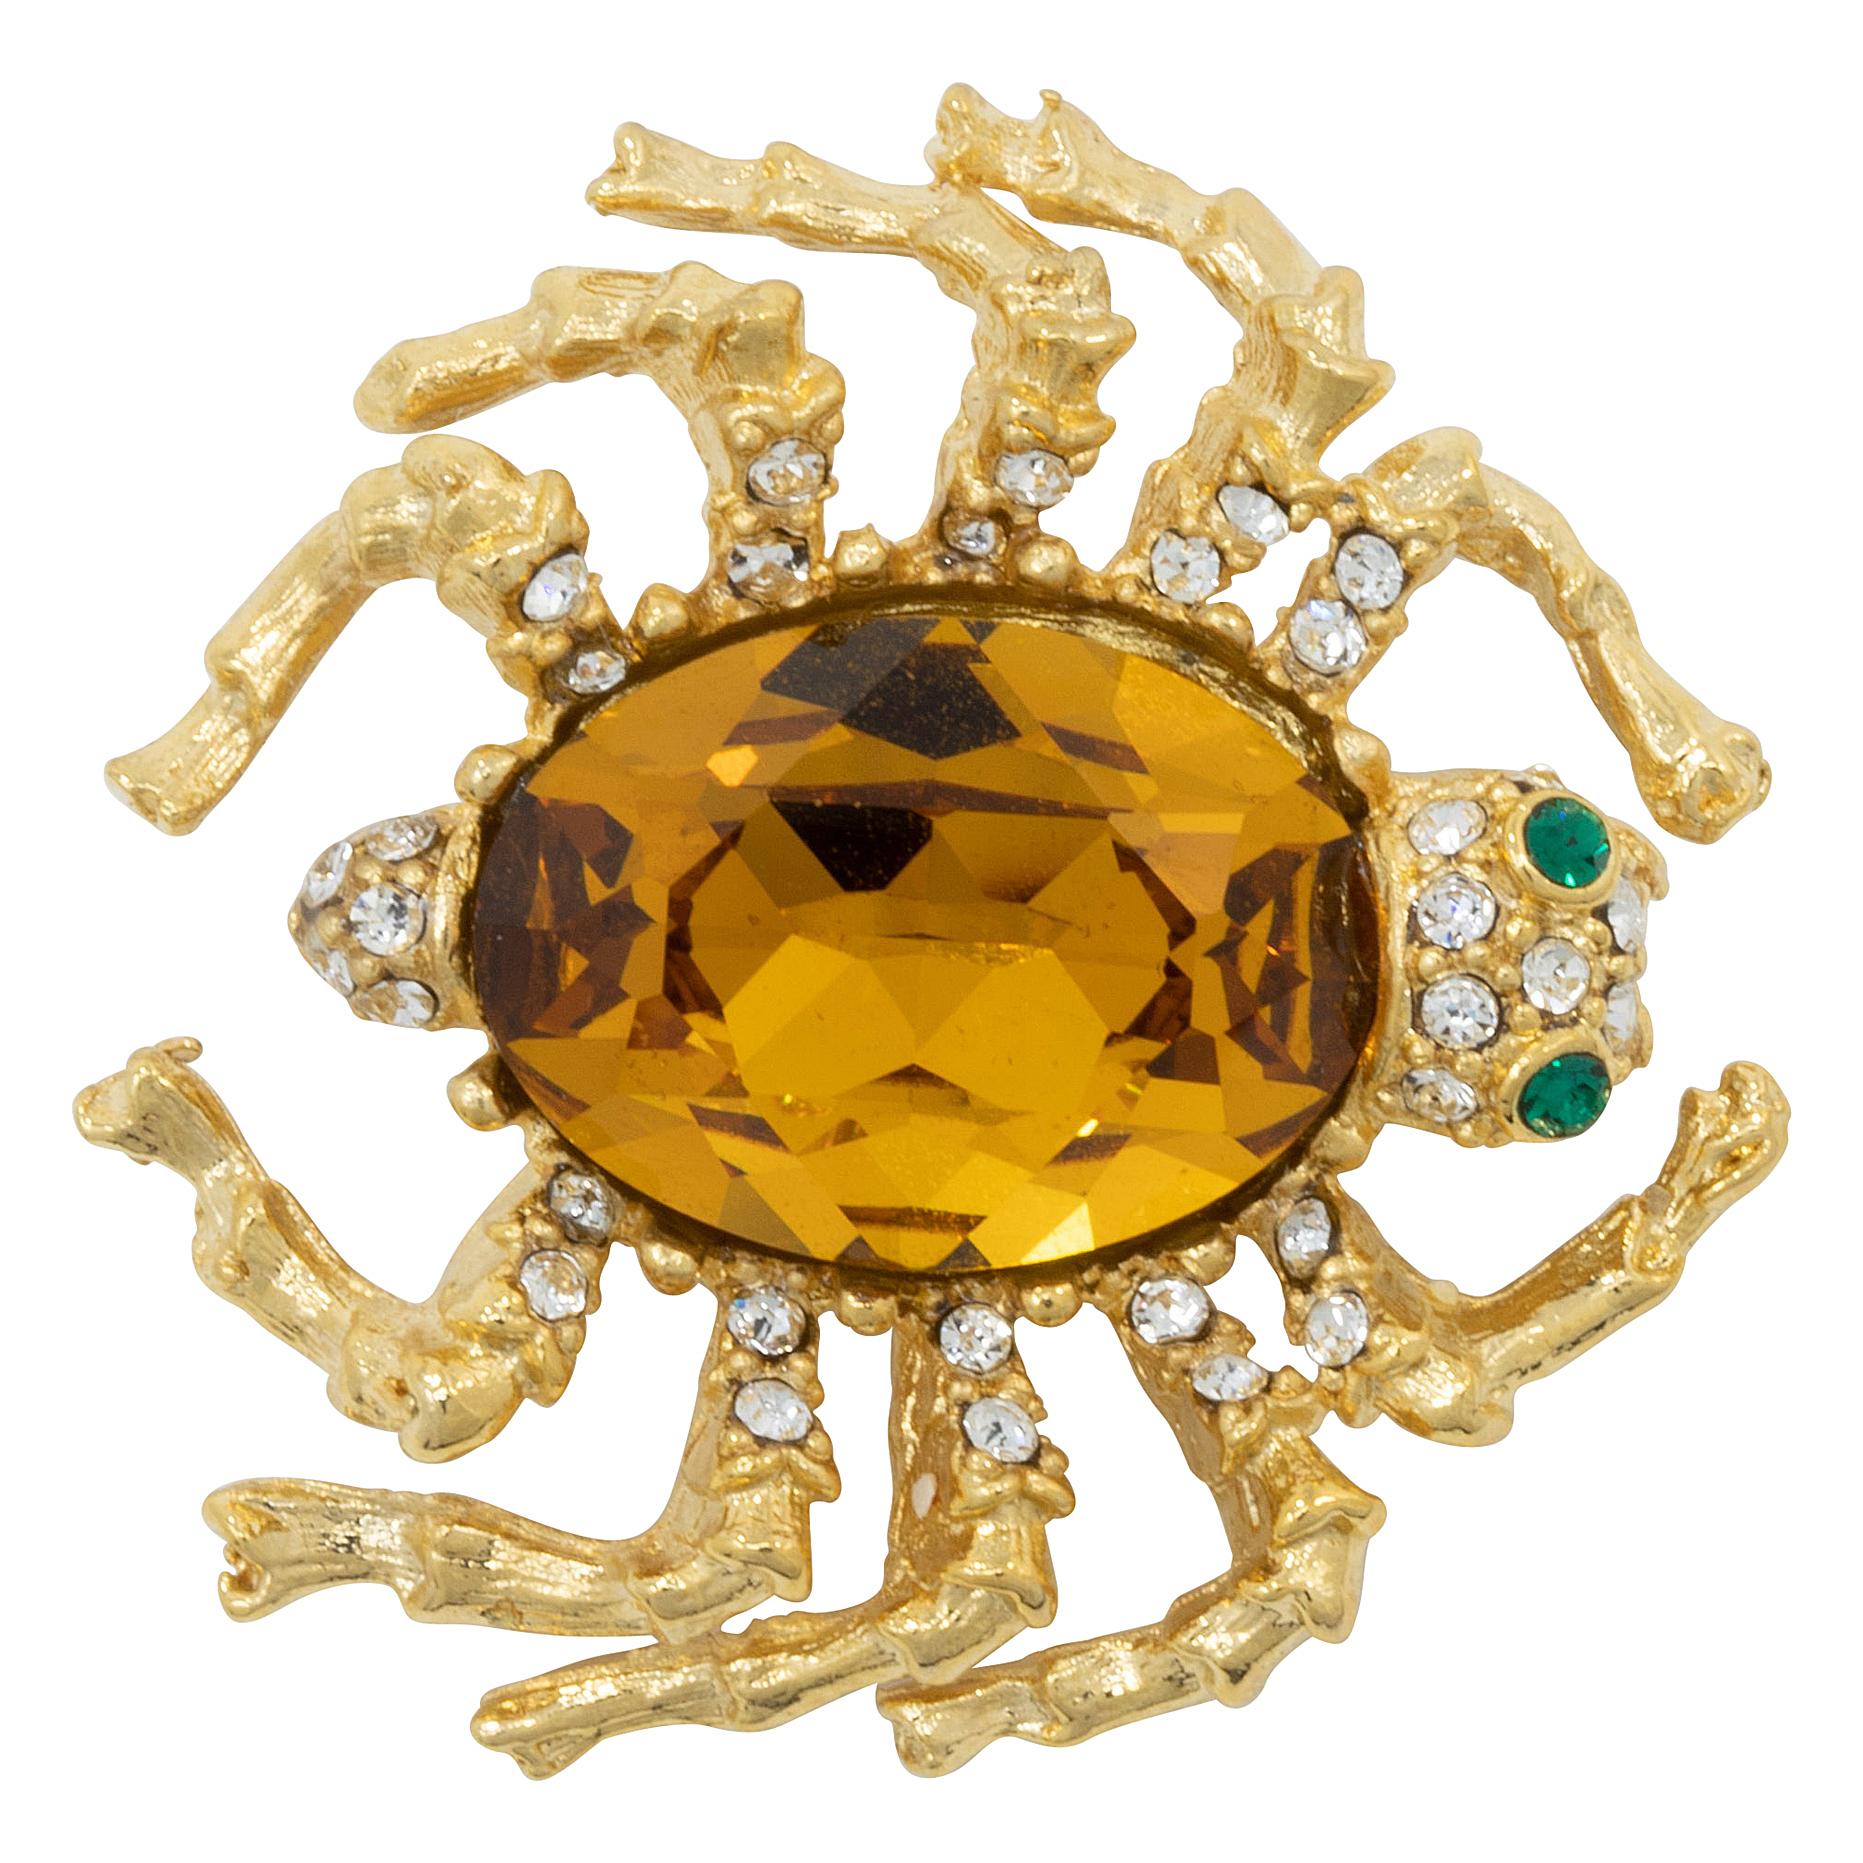 Kenneth Jay Lane Gold Amber Spider Pin Brooch, Accented with Crystals, KJL